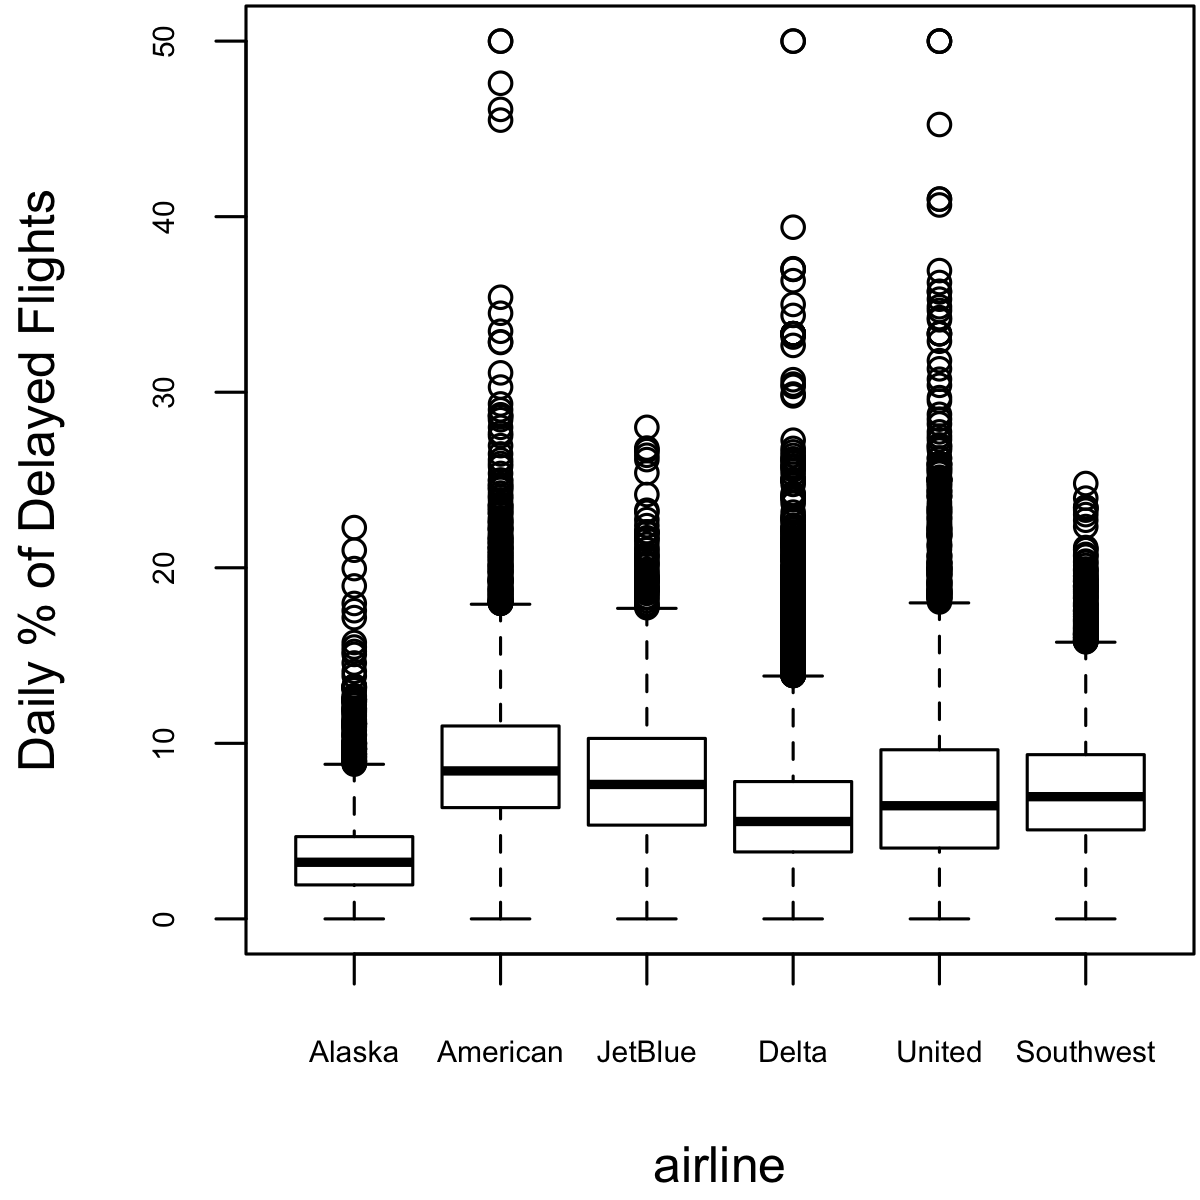 Boxplot of percent of airline delays by carrier.